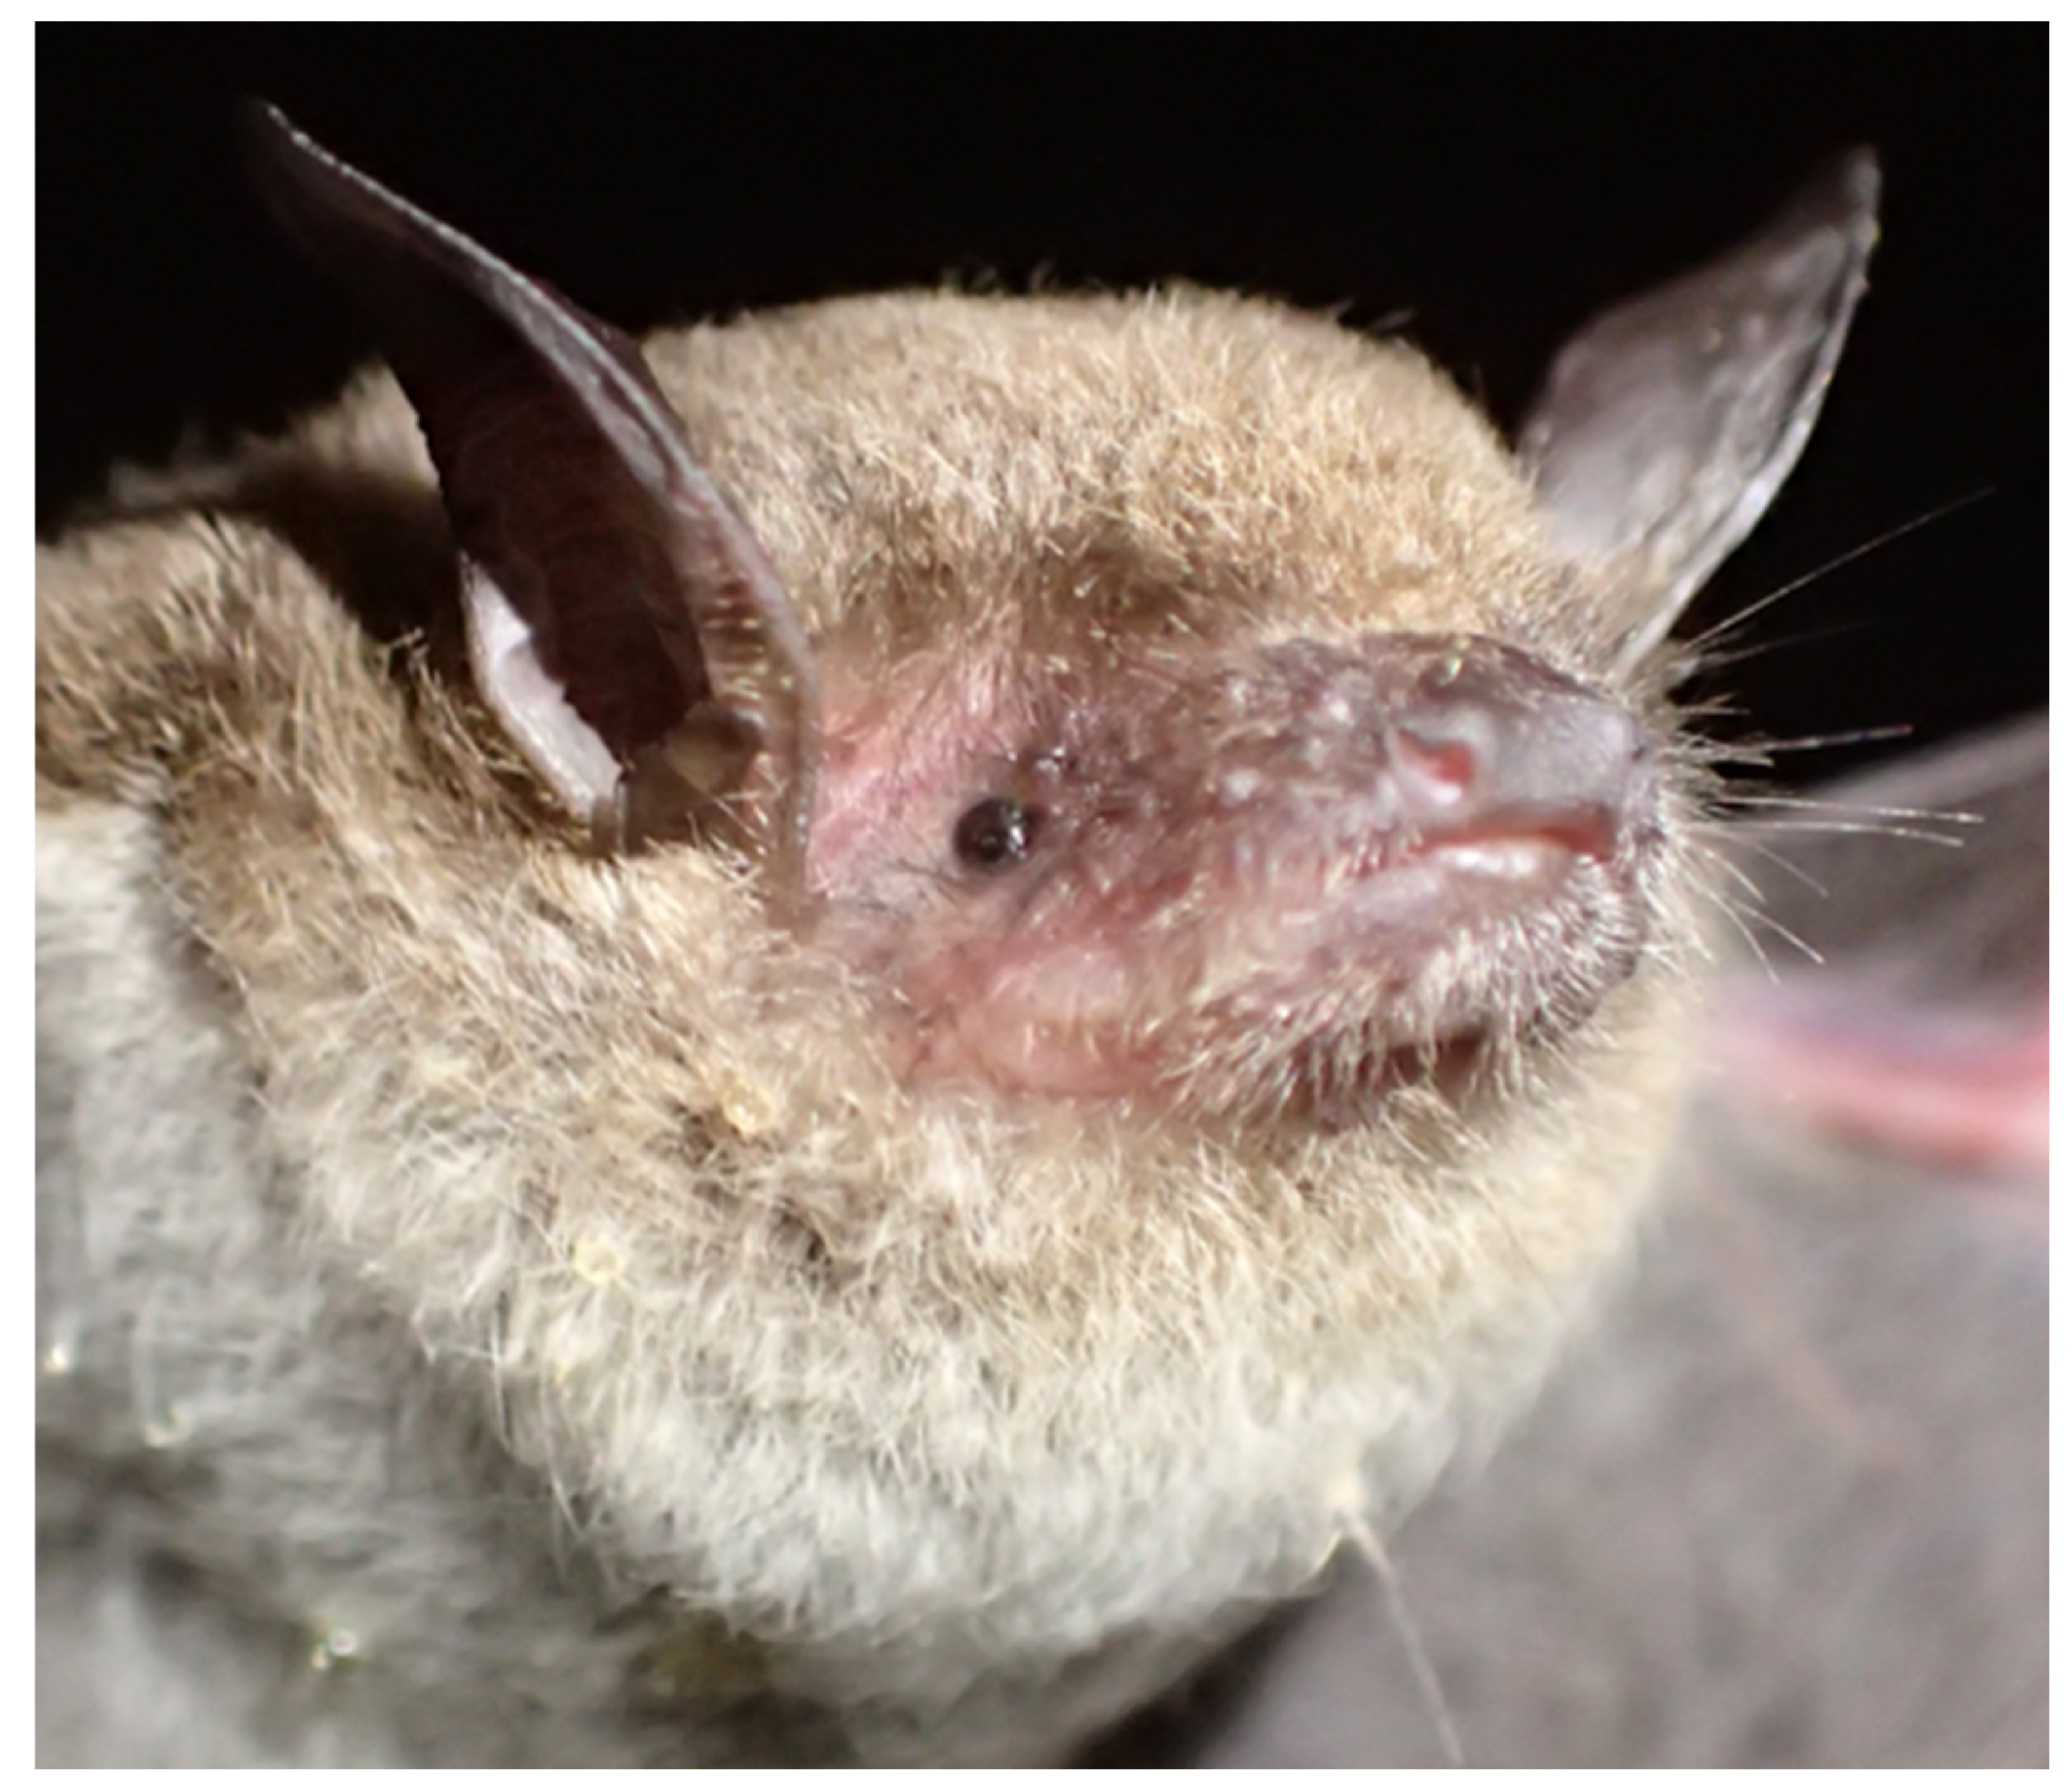 Diversity | Free Full-Text | Importance of Mangroves for Bat Research and  Conservation: A Case Study from Vietnam with Notes on Echolocation of  Myotis hasselti